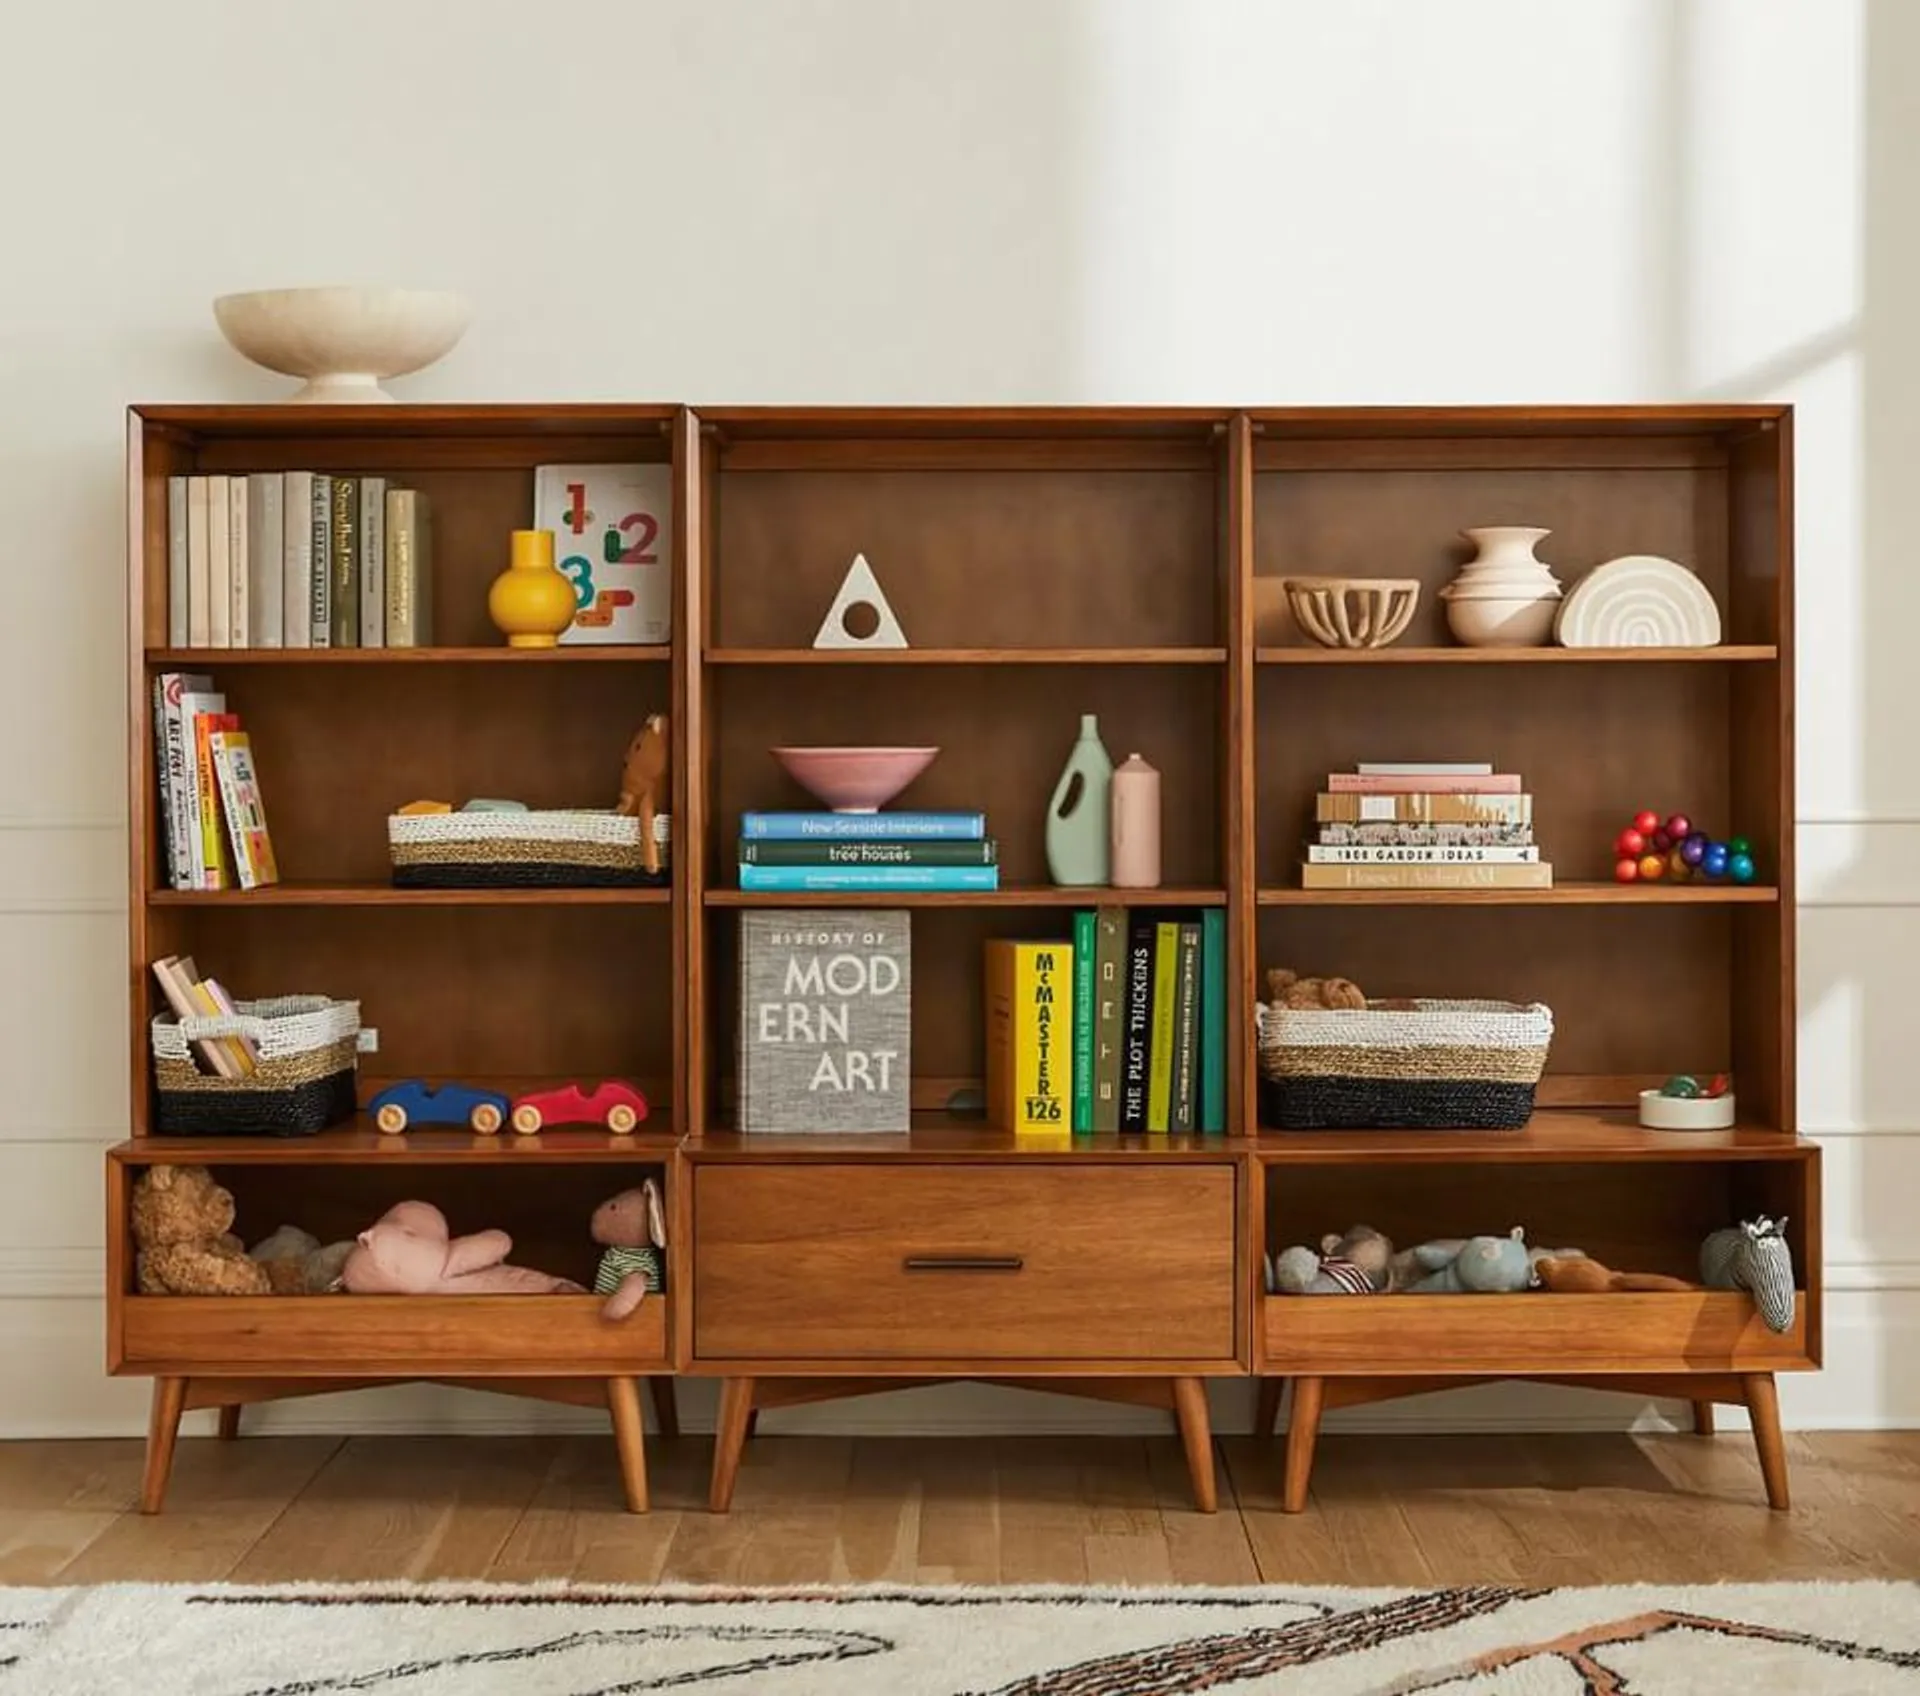 west elm x pbk Mid-Century Build Your Own Wall System